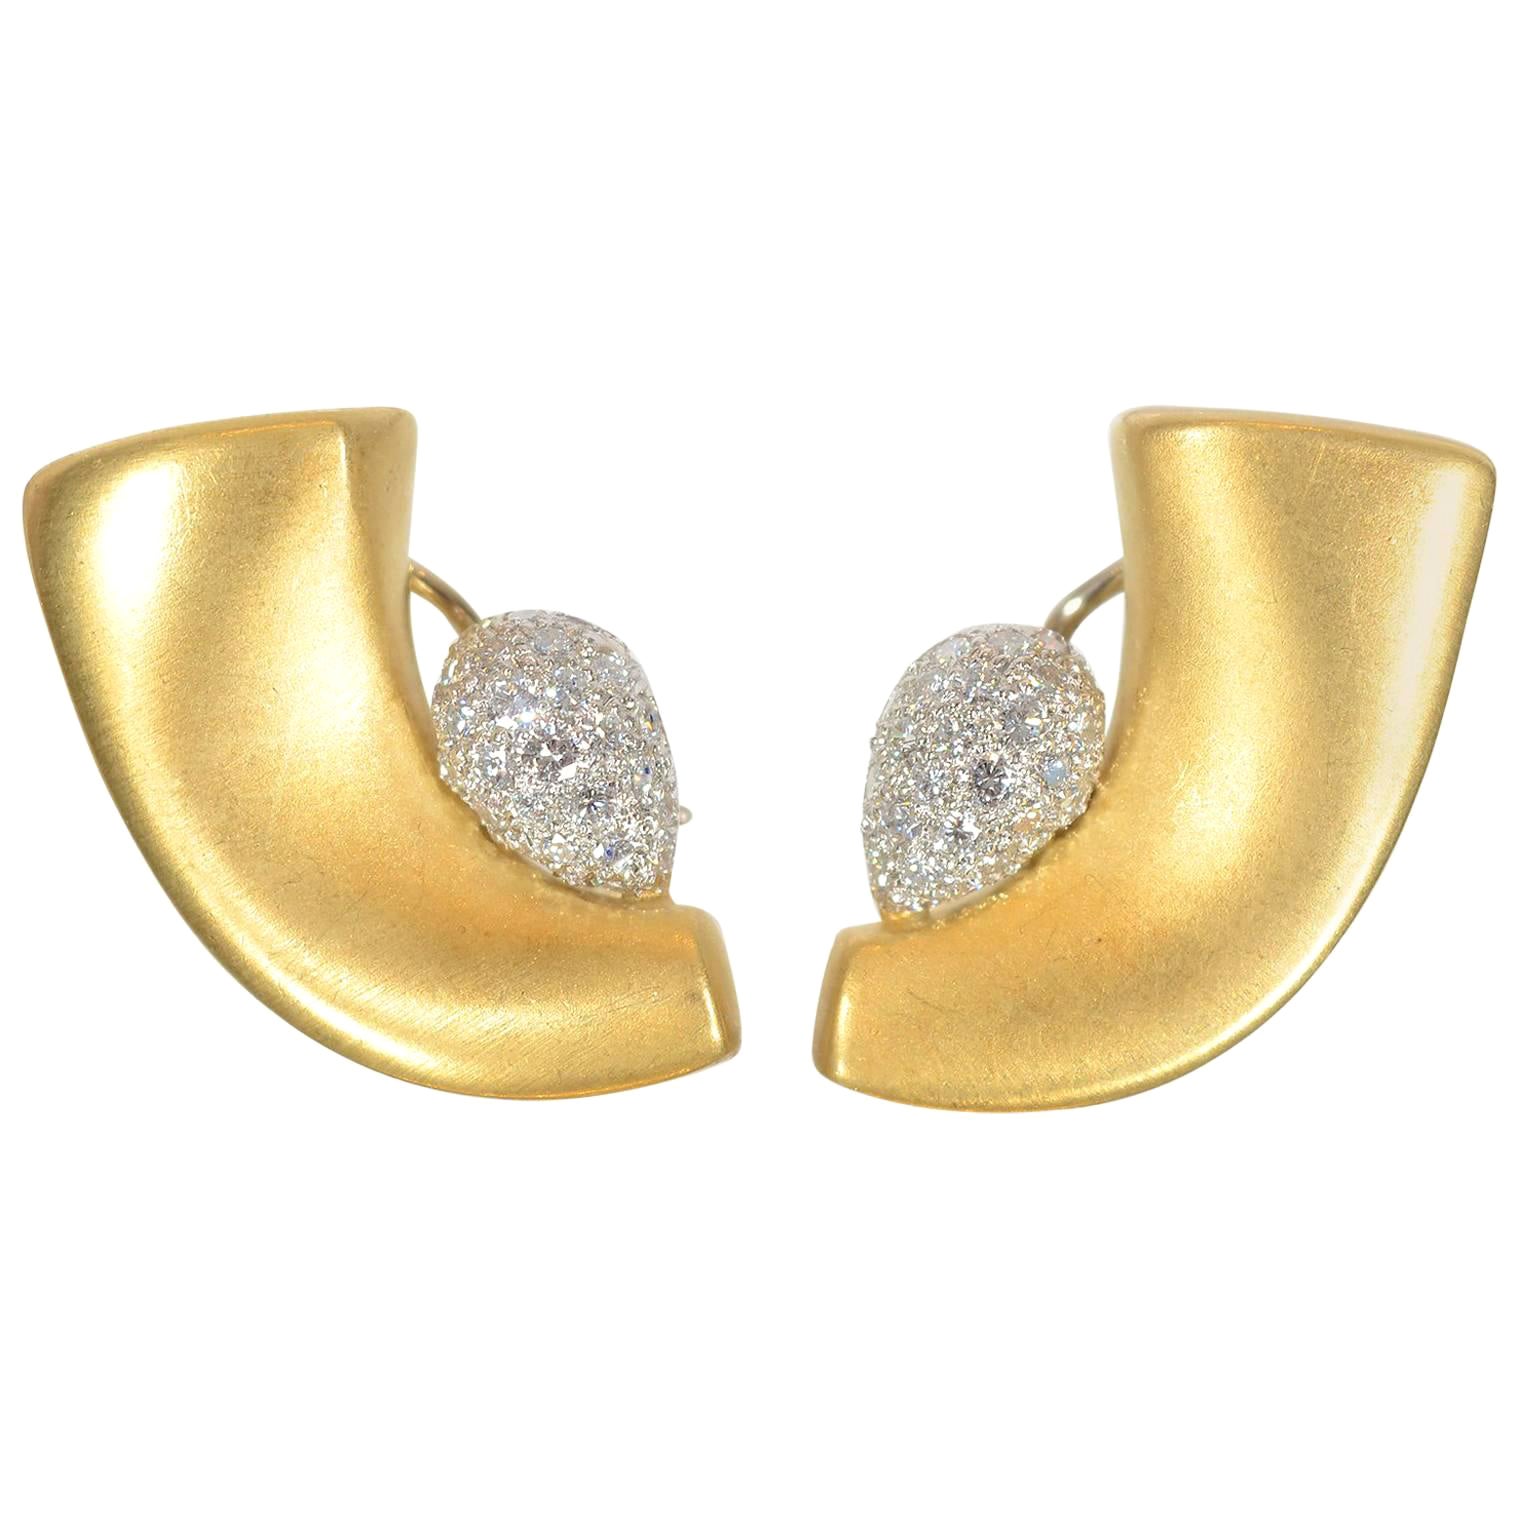 Marlene Stowe Crescent Earrings with Pave Diamonds